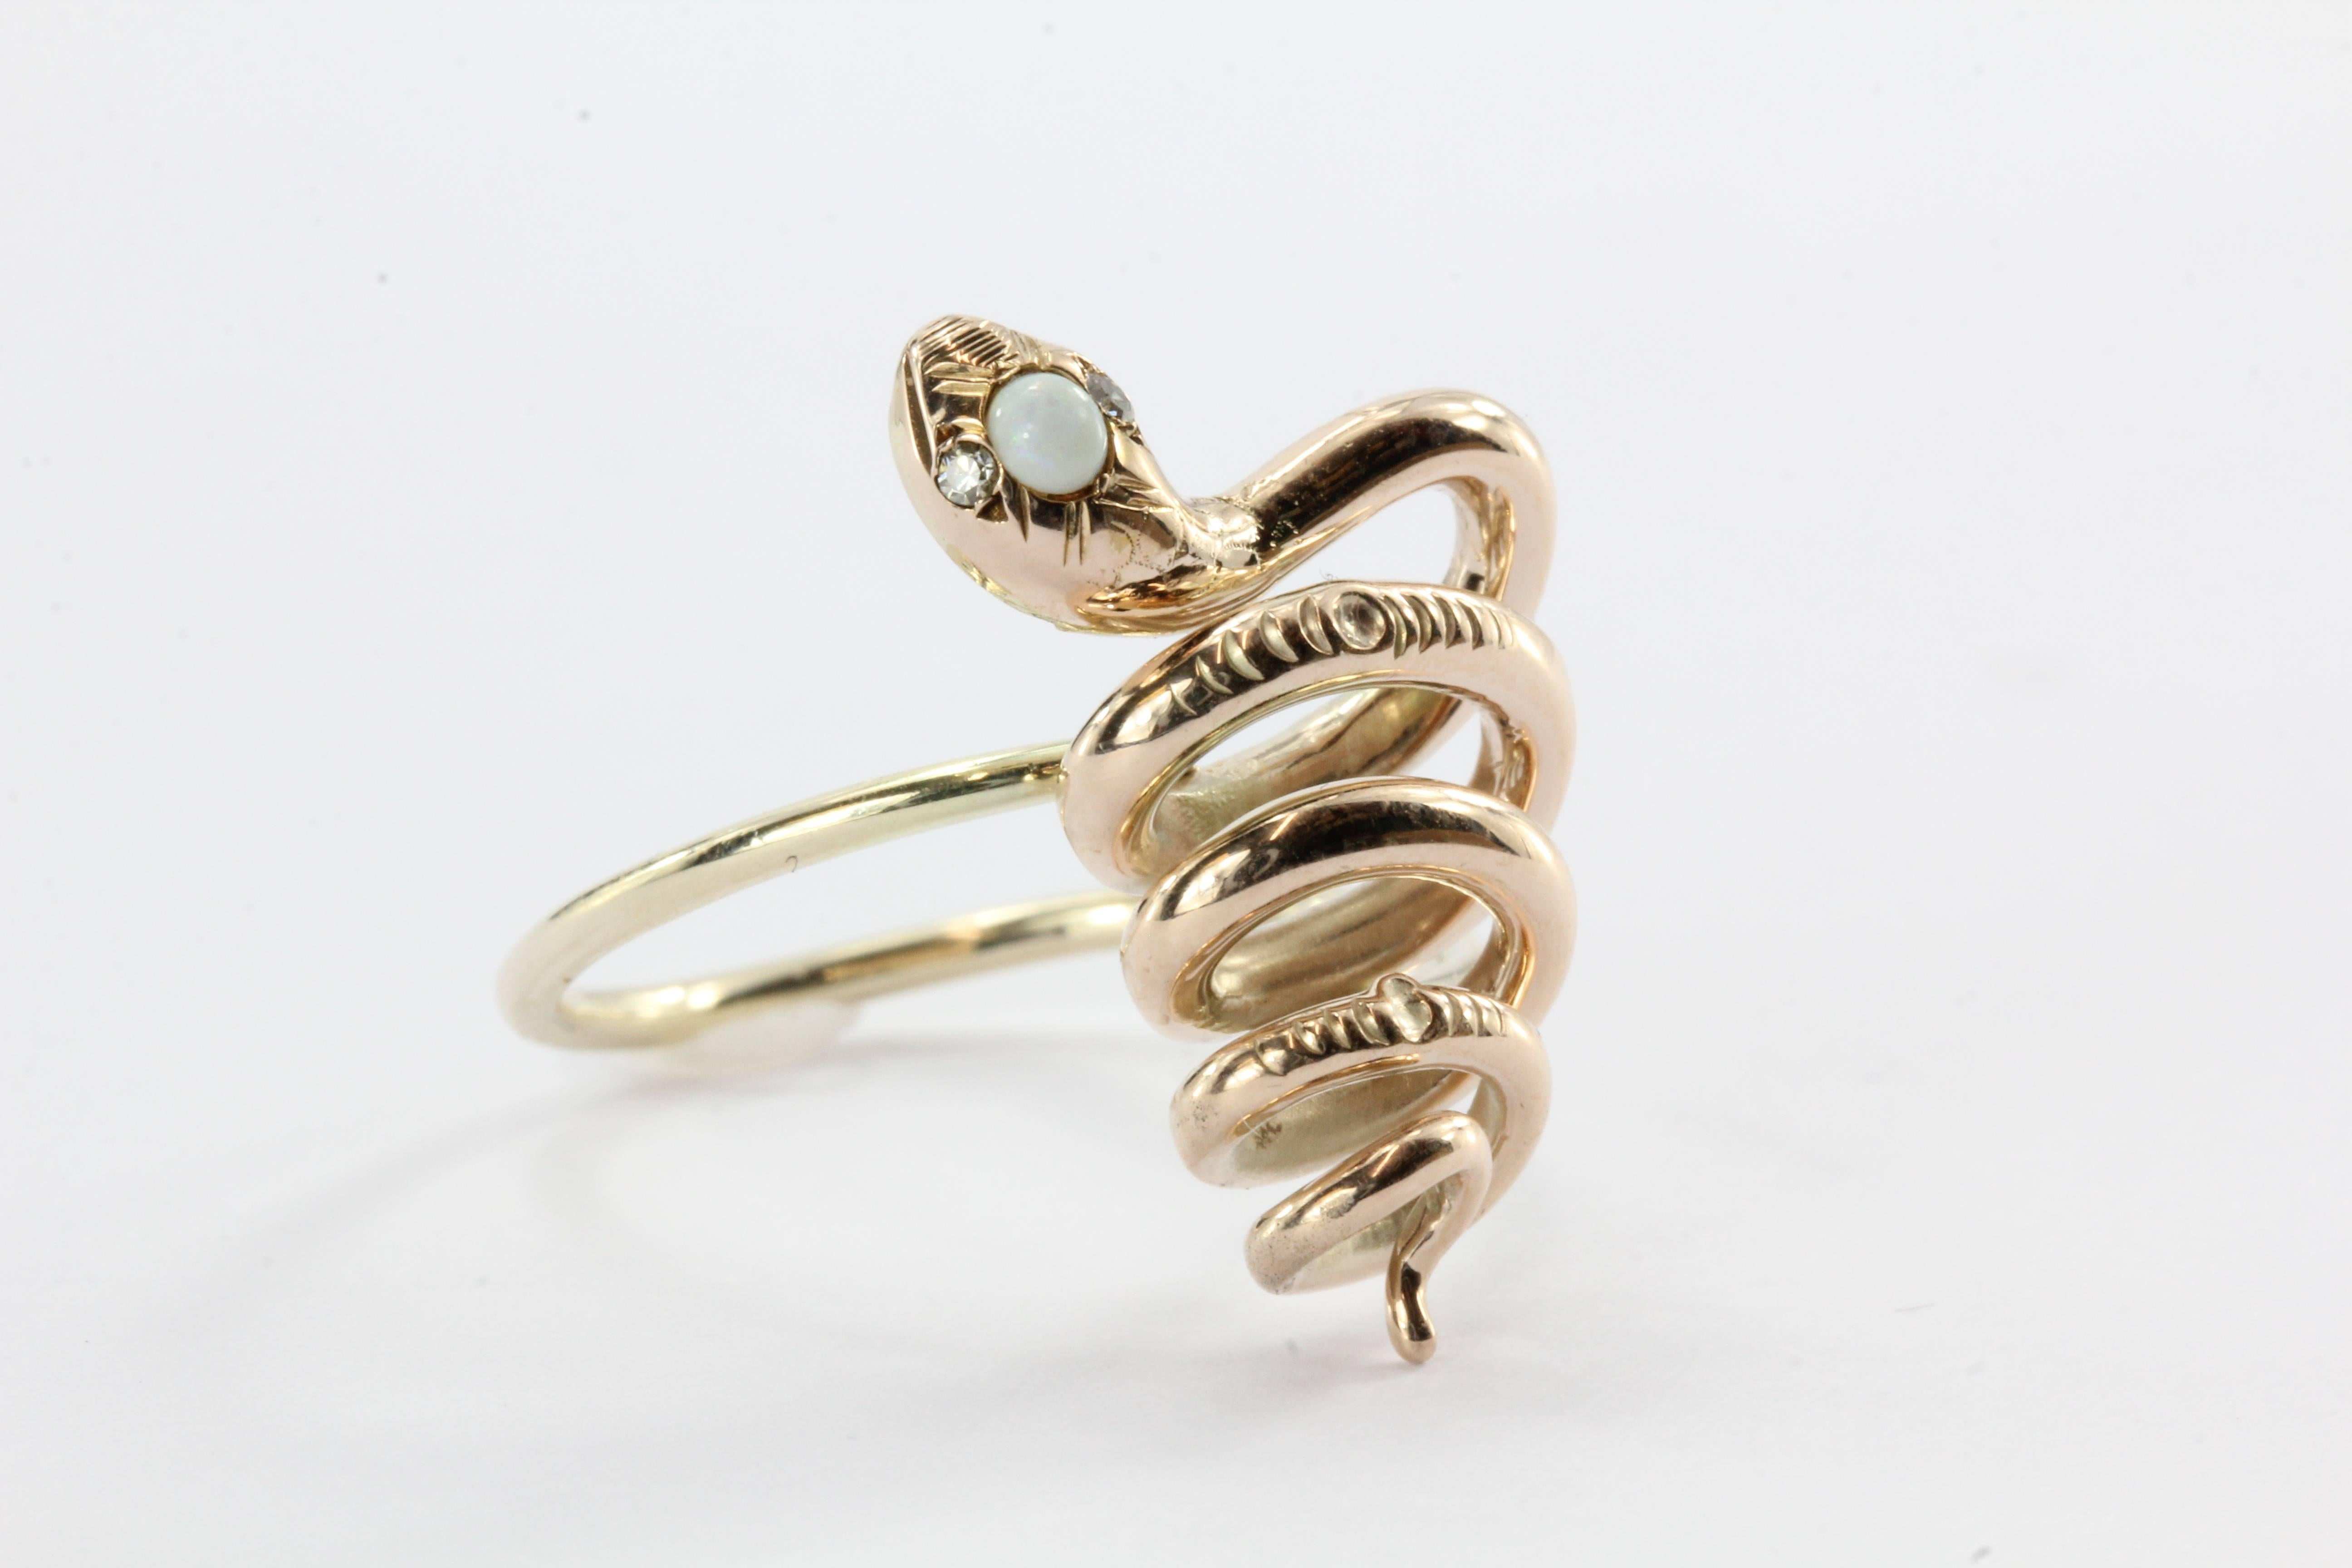 Antique Victorian 10K Gold Curly Twisted Snake Opal Diamond Conversion Ring. The ring is in excellent estate condition and ready to wear. It was professionally converted from a hat pin in to a ring. The snakes head is set with an opal and two